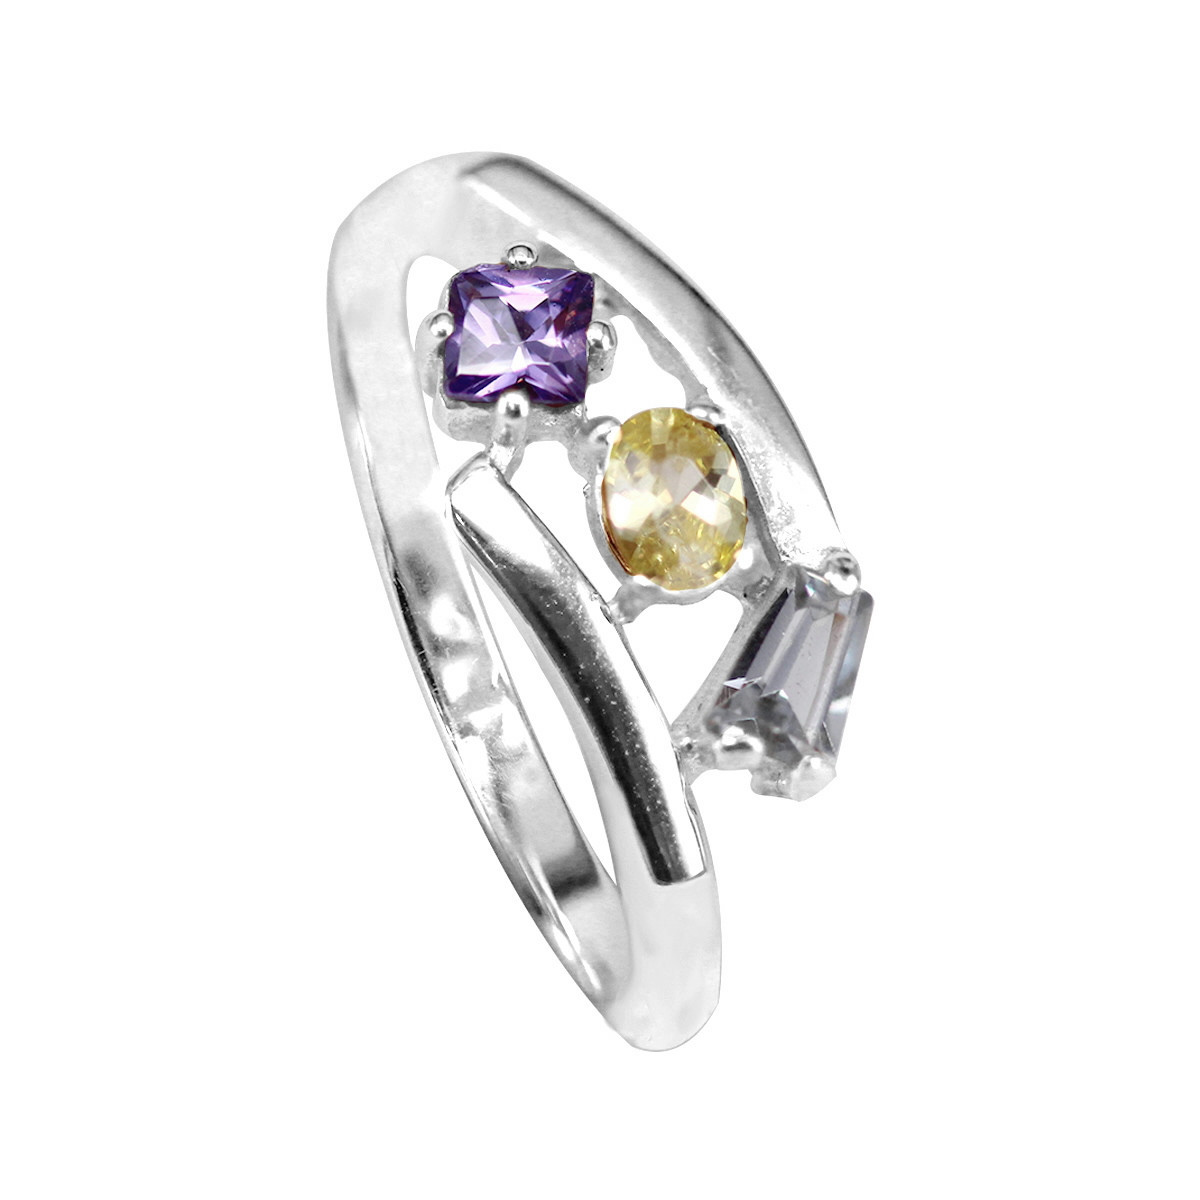 CITRINE AMETHYST RING AND BLUE TOPAZ